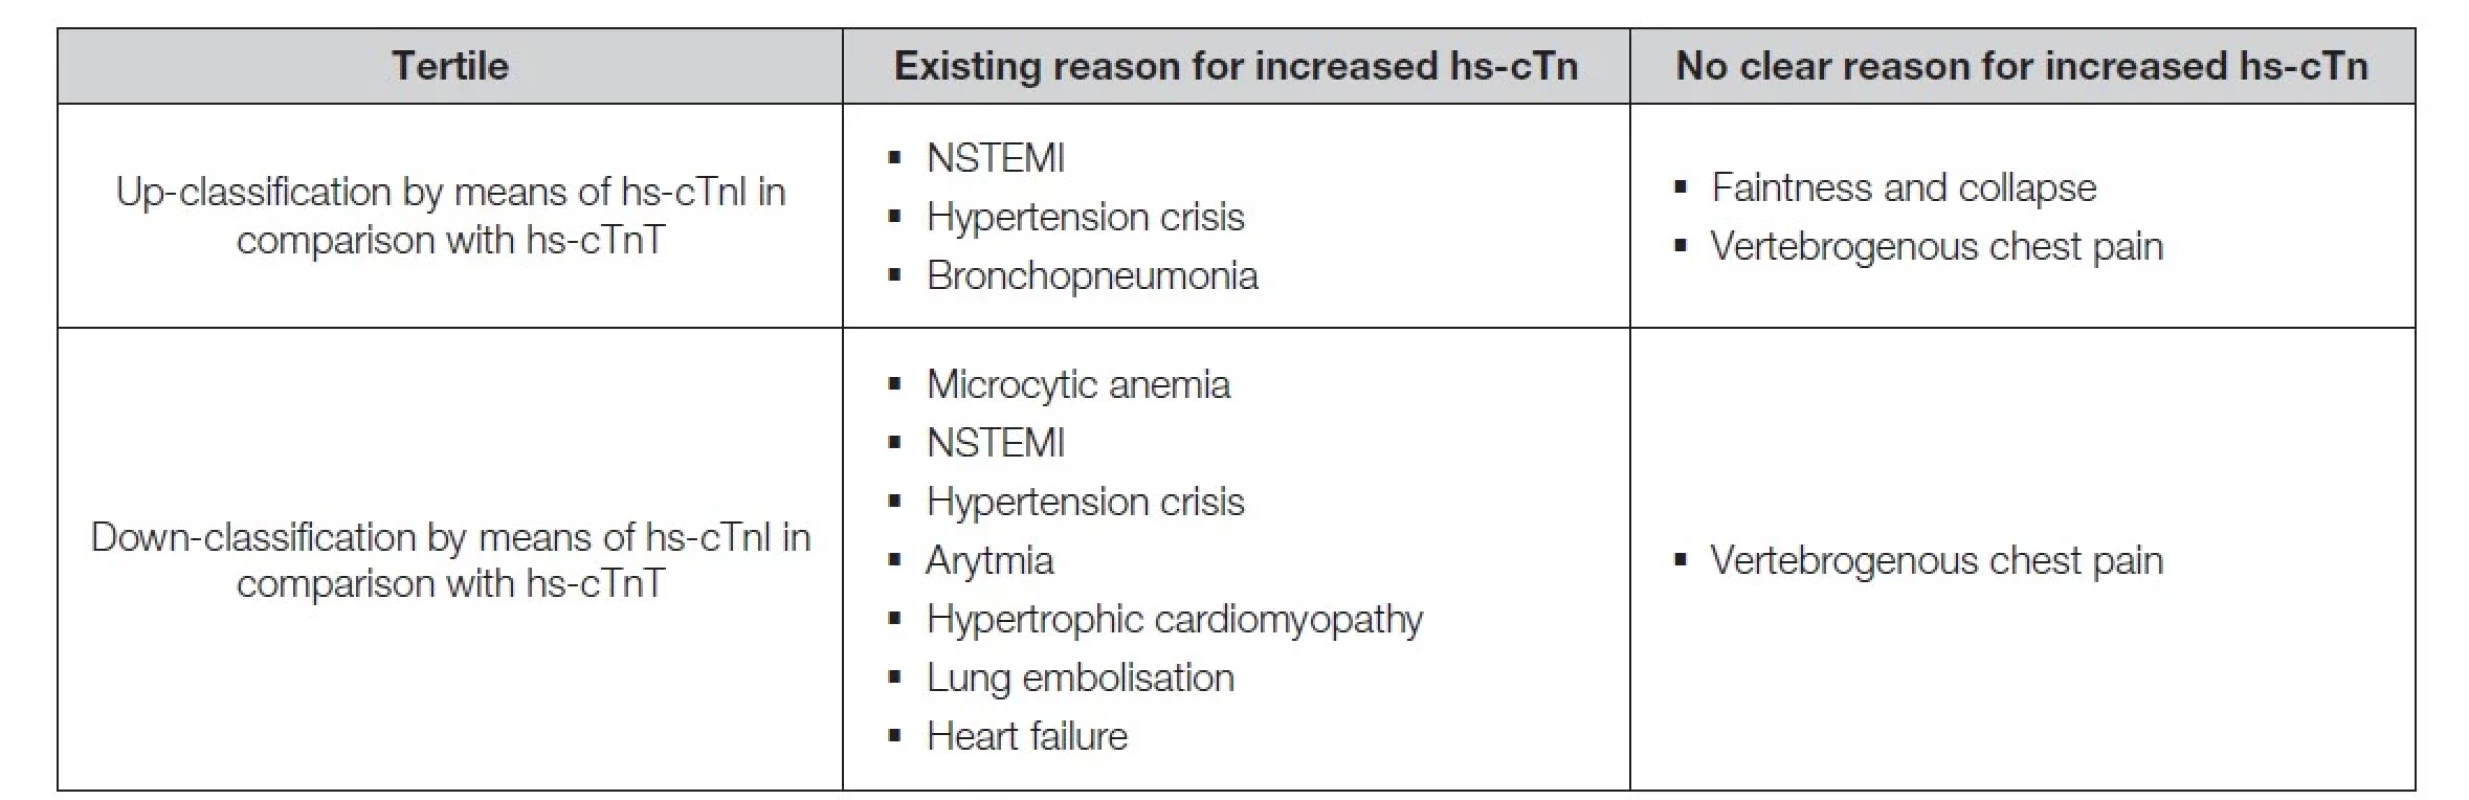 Up- and down-classification of patients by means of hs-cTnI in comparison with classification based on hs-cTnT. Some
diagnoses were found in more than one patient.